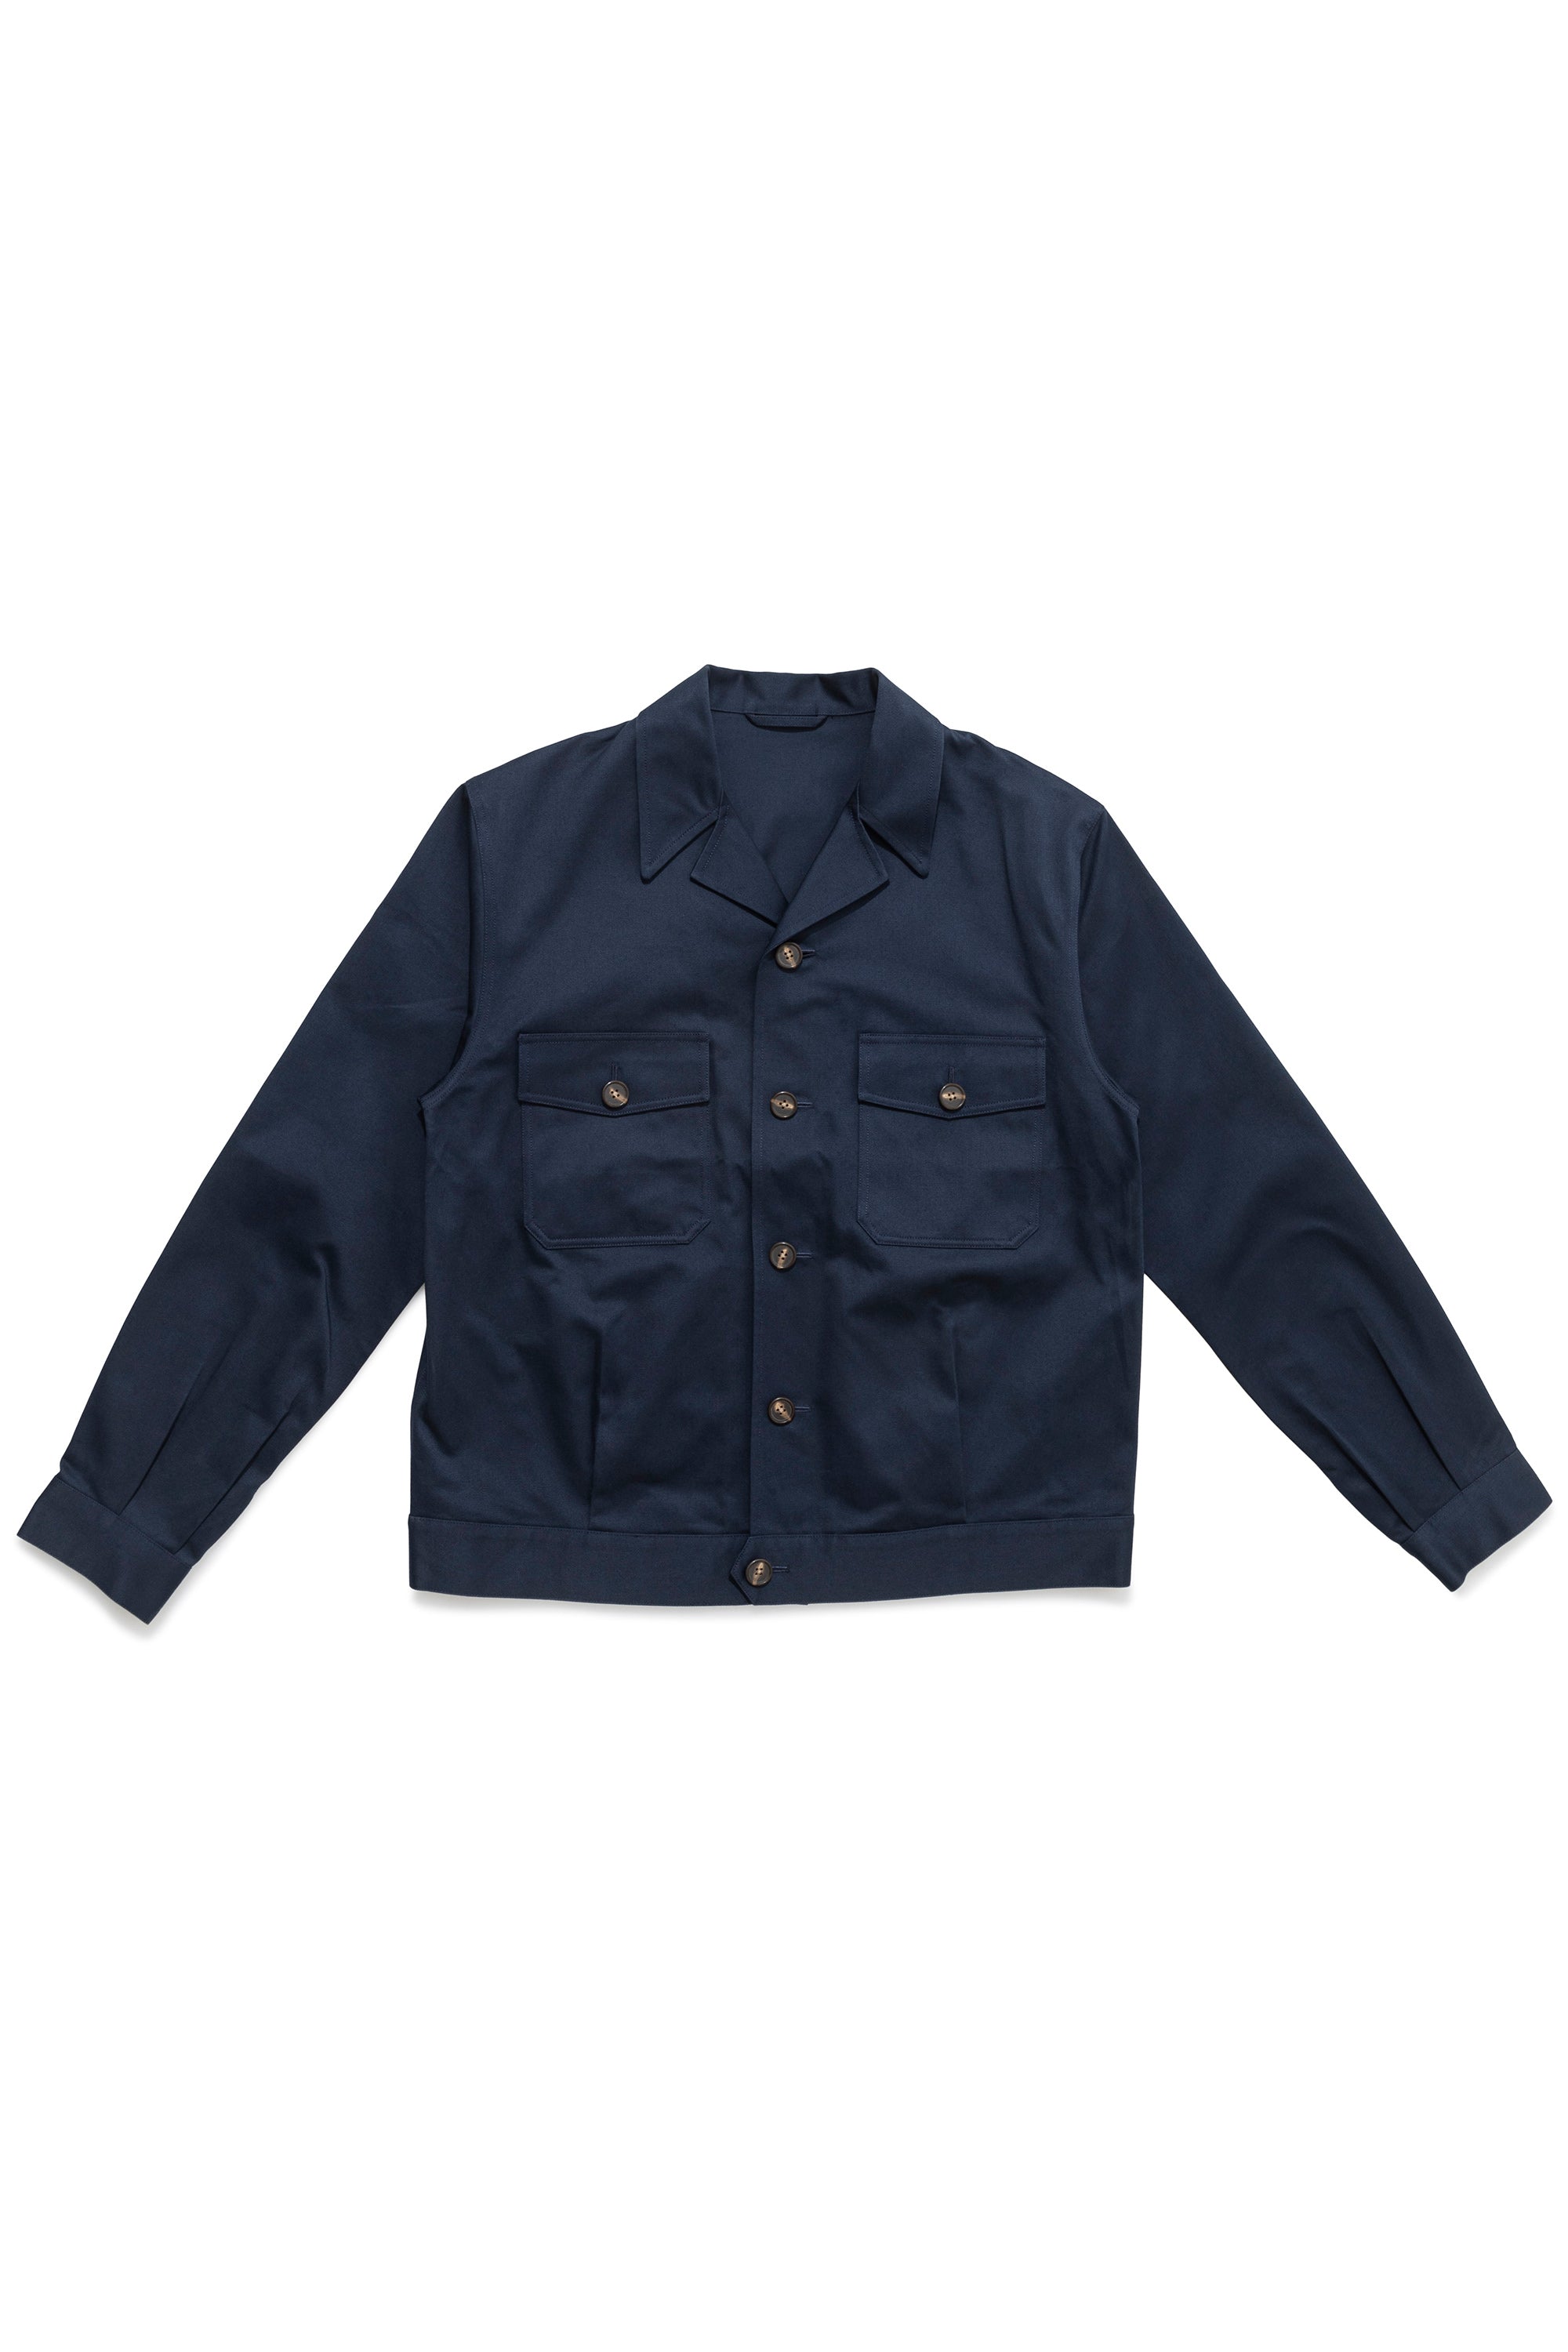 The Armoury 11-A011B Sport Navy Cotton Road Jacket